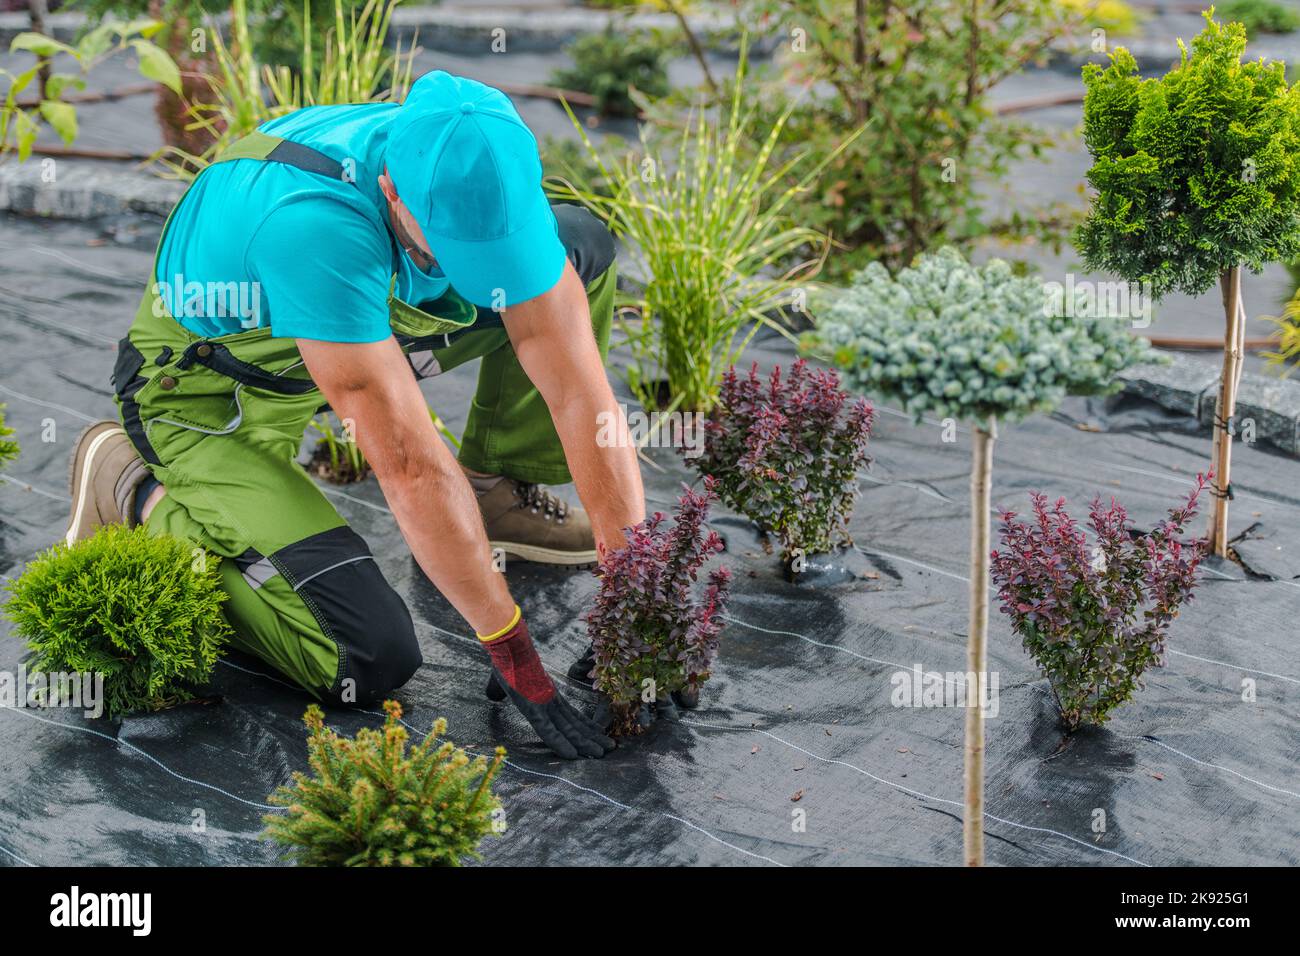 Caucasian Landscaper Planting Flowering Bush in the Ground Covered with Weed Control Agrotextile Fabric. Landscaped Garden Development Process. Stock Photo